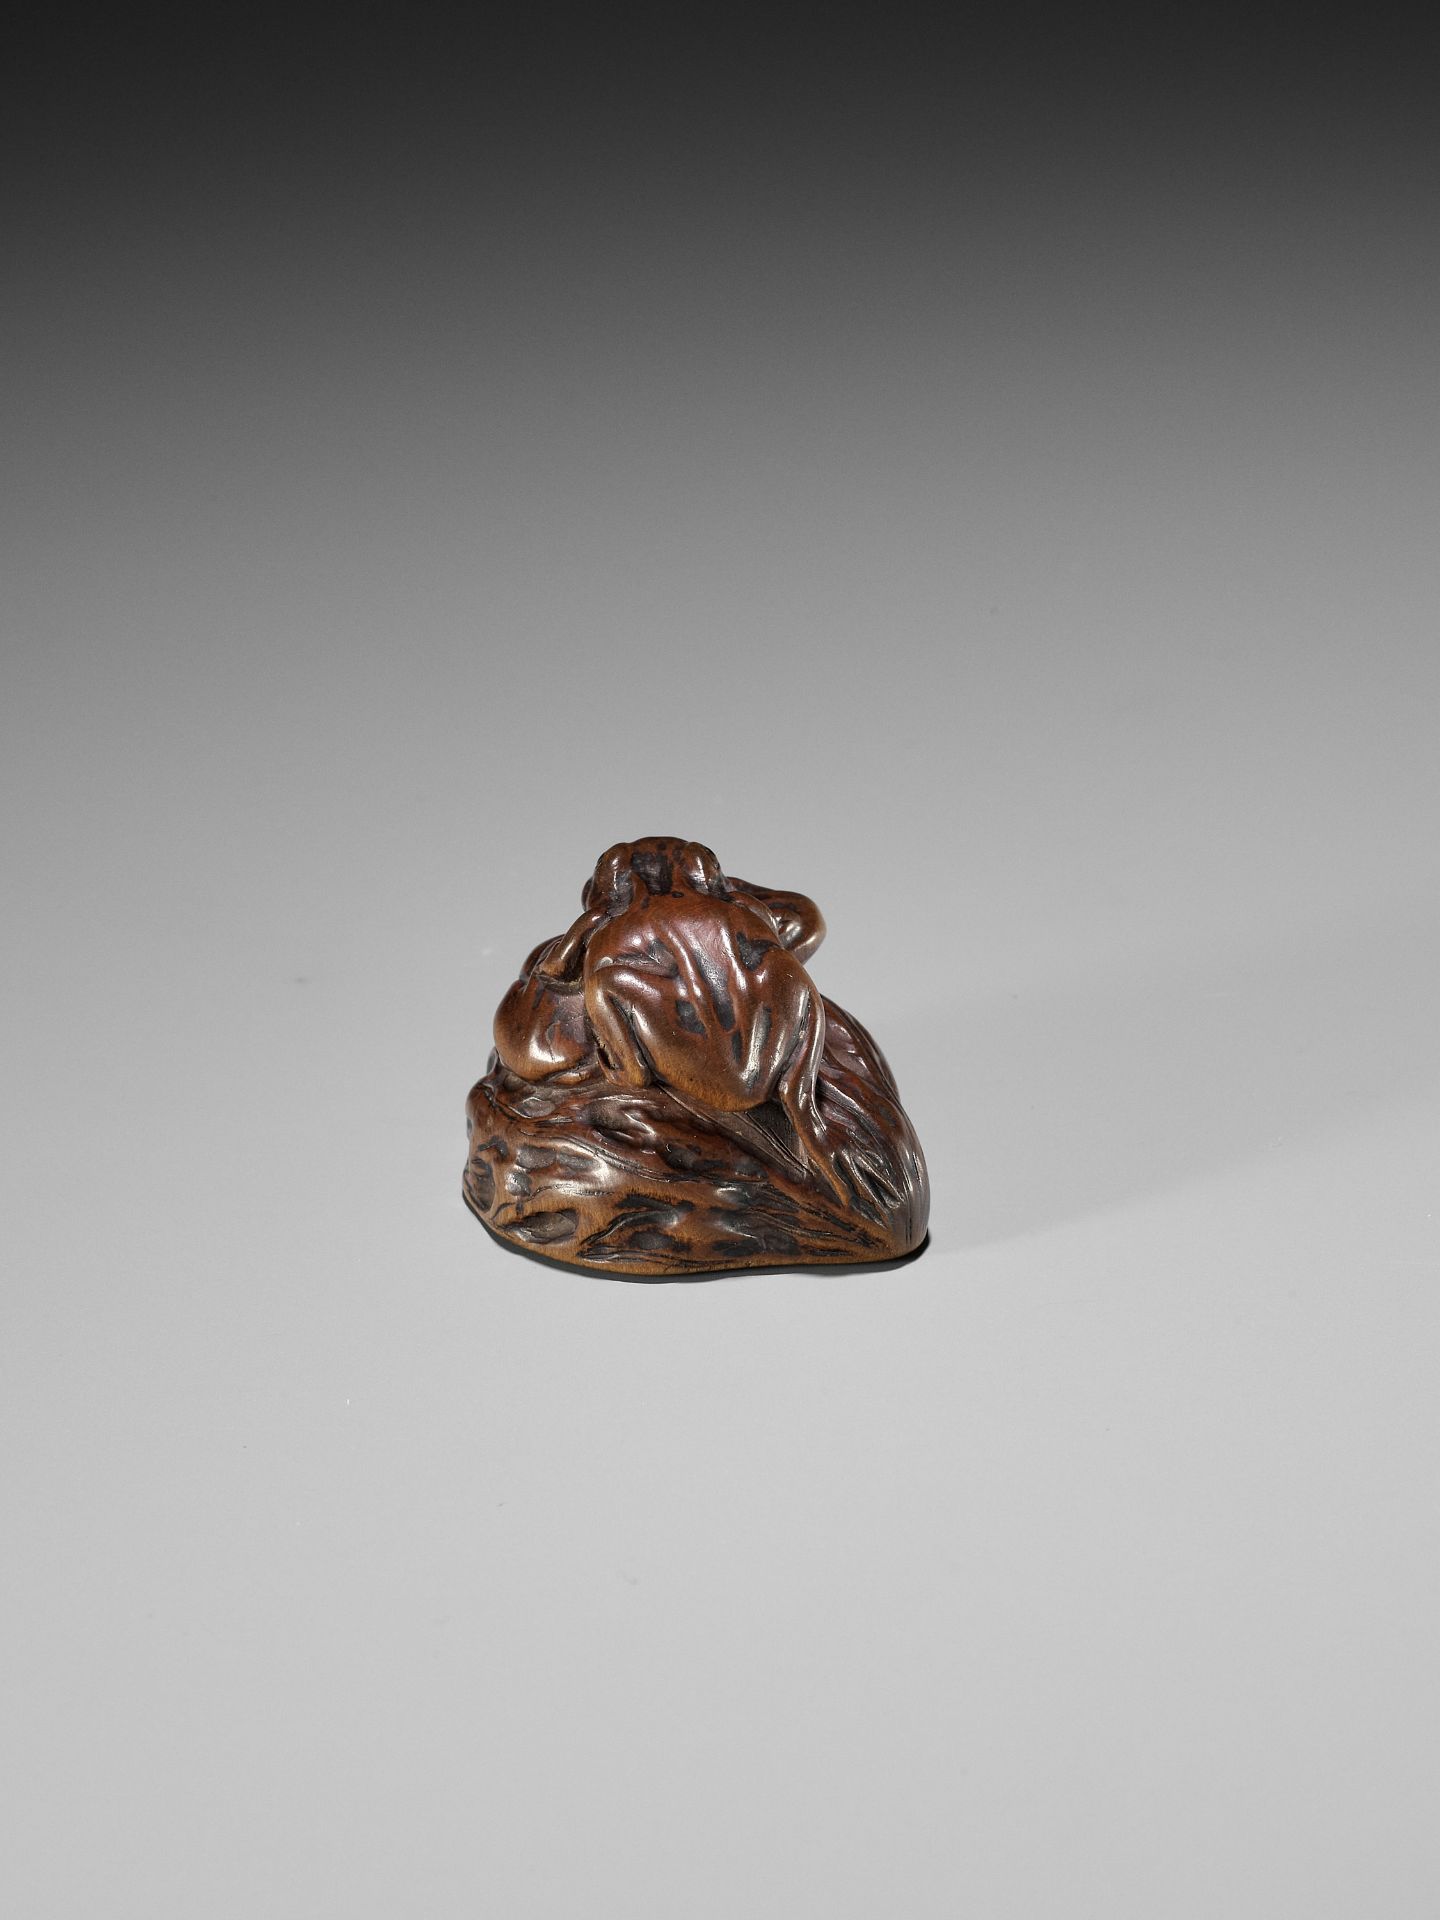 ISSAN: A WOOD NETSUKE OF TWO TOADS ON A WALNUT - Image 2 of 11